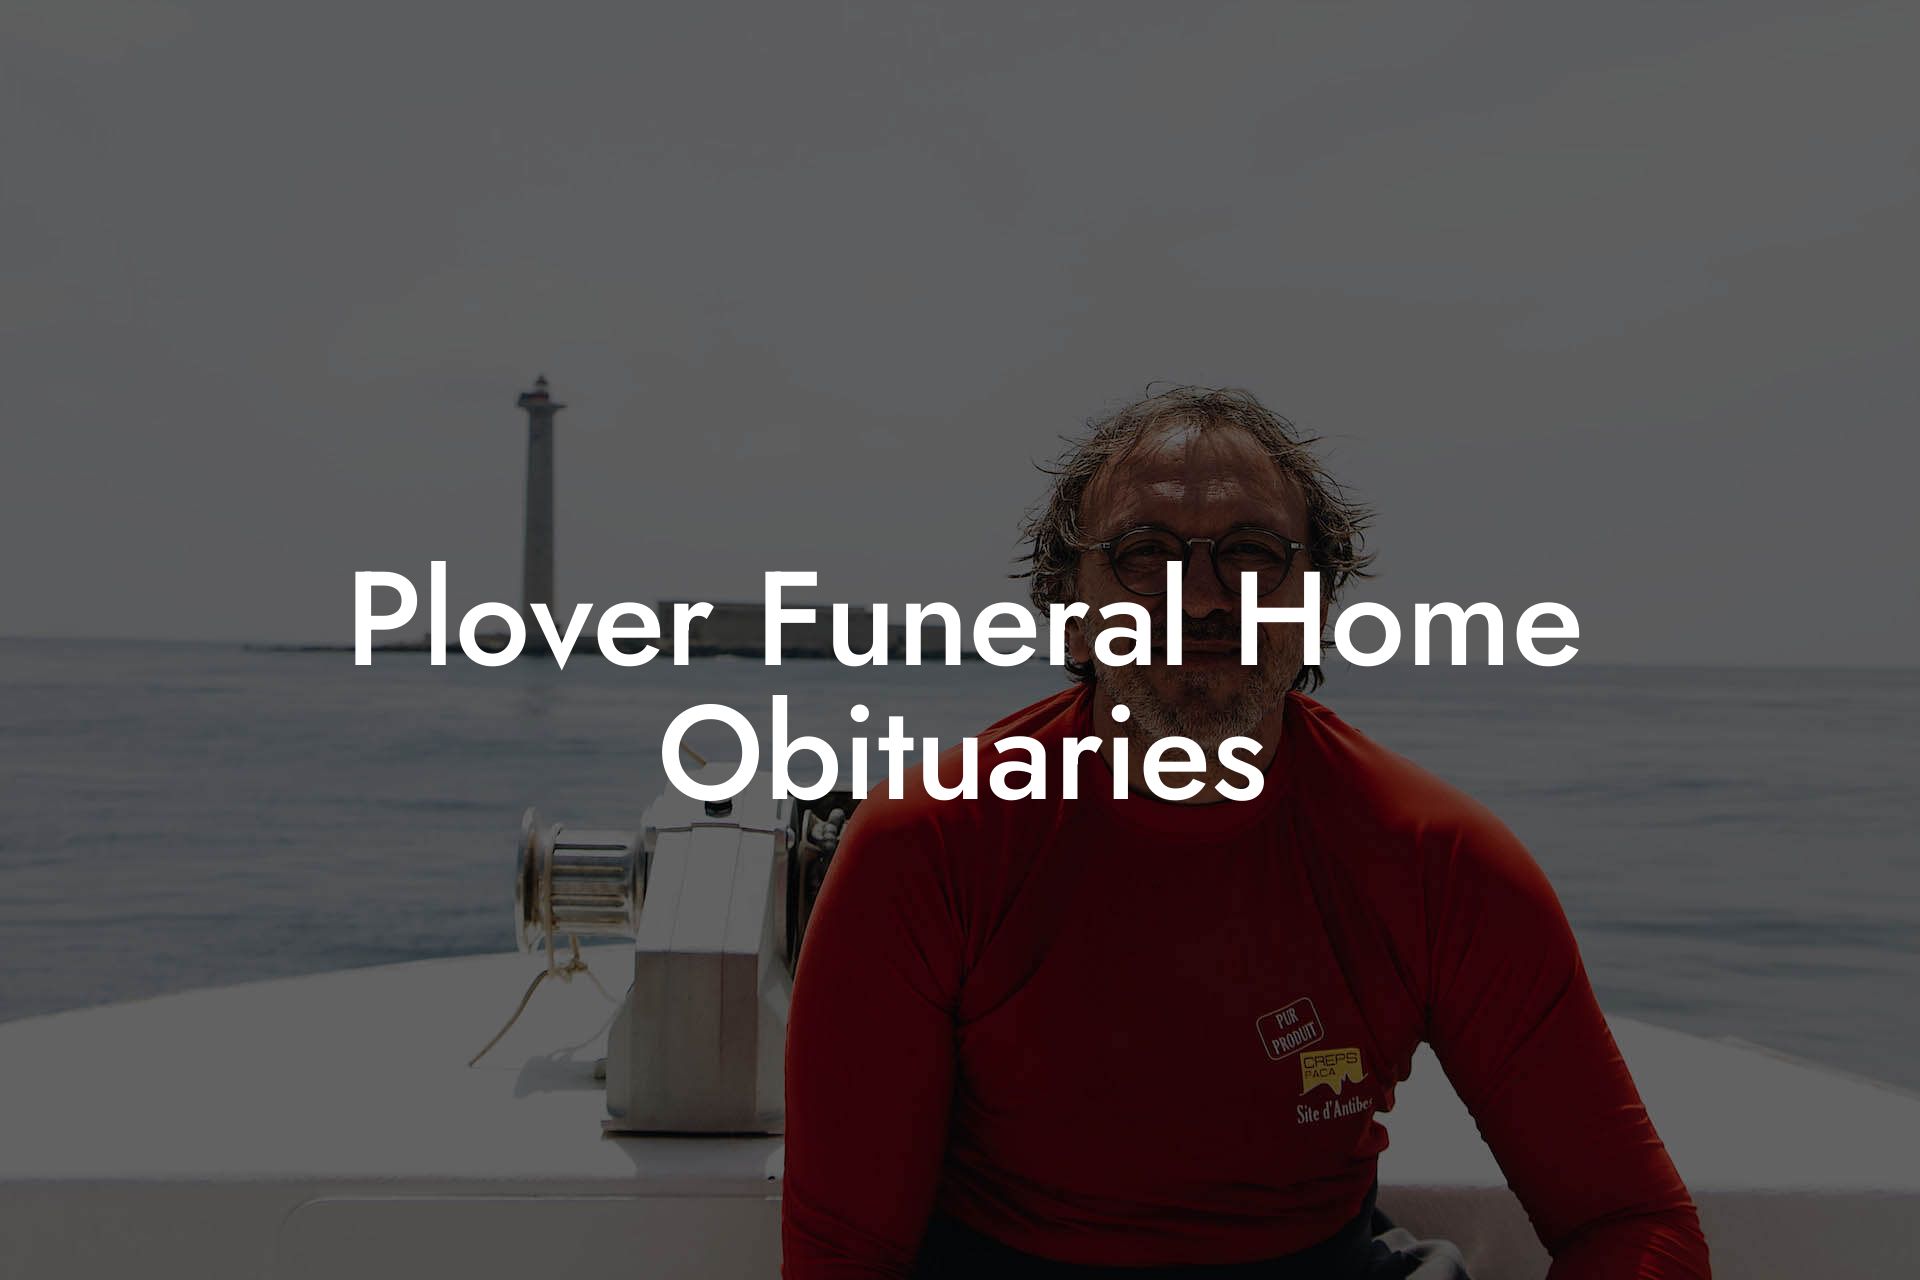 Plover Funeral Home Obituaries